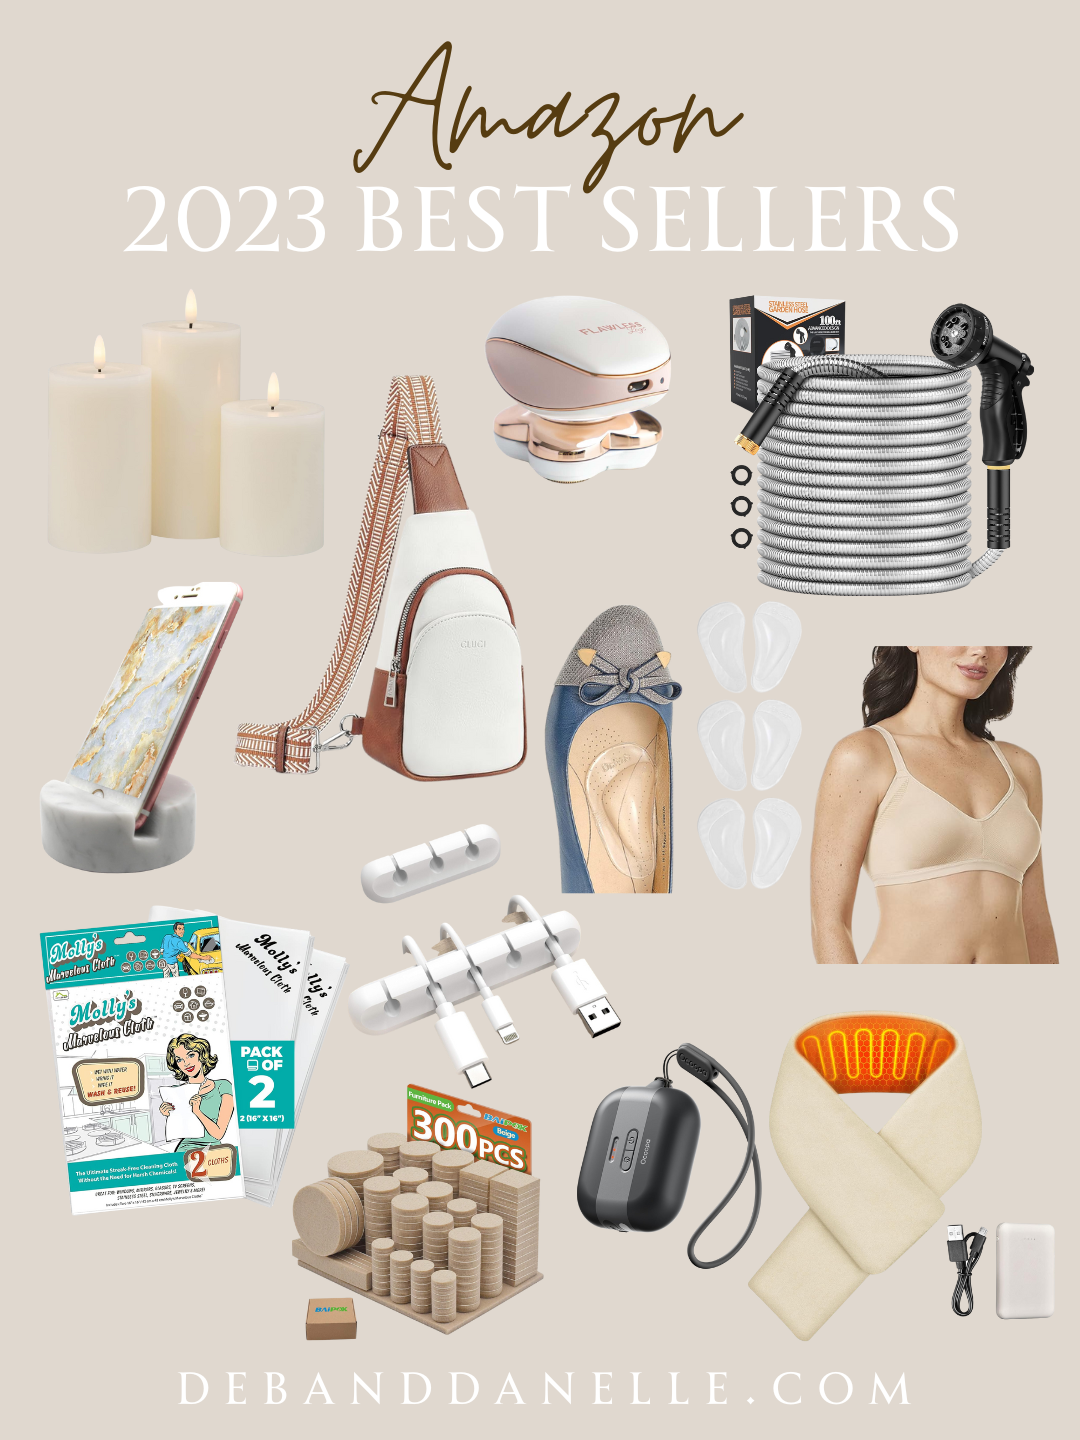 9Product Reviews best sellers 2023: The top 15 best-selling